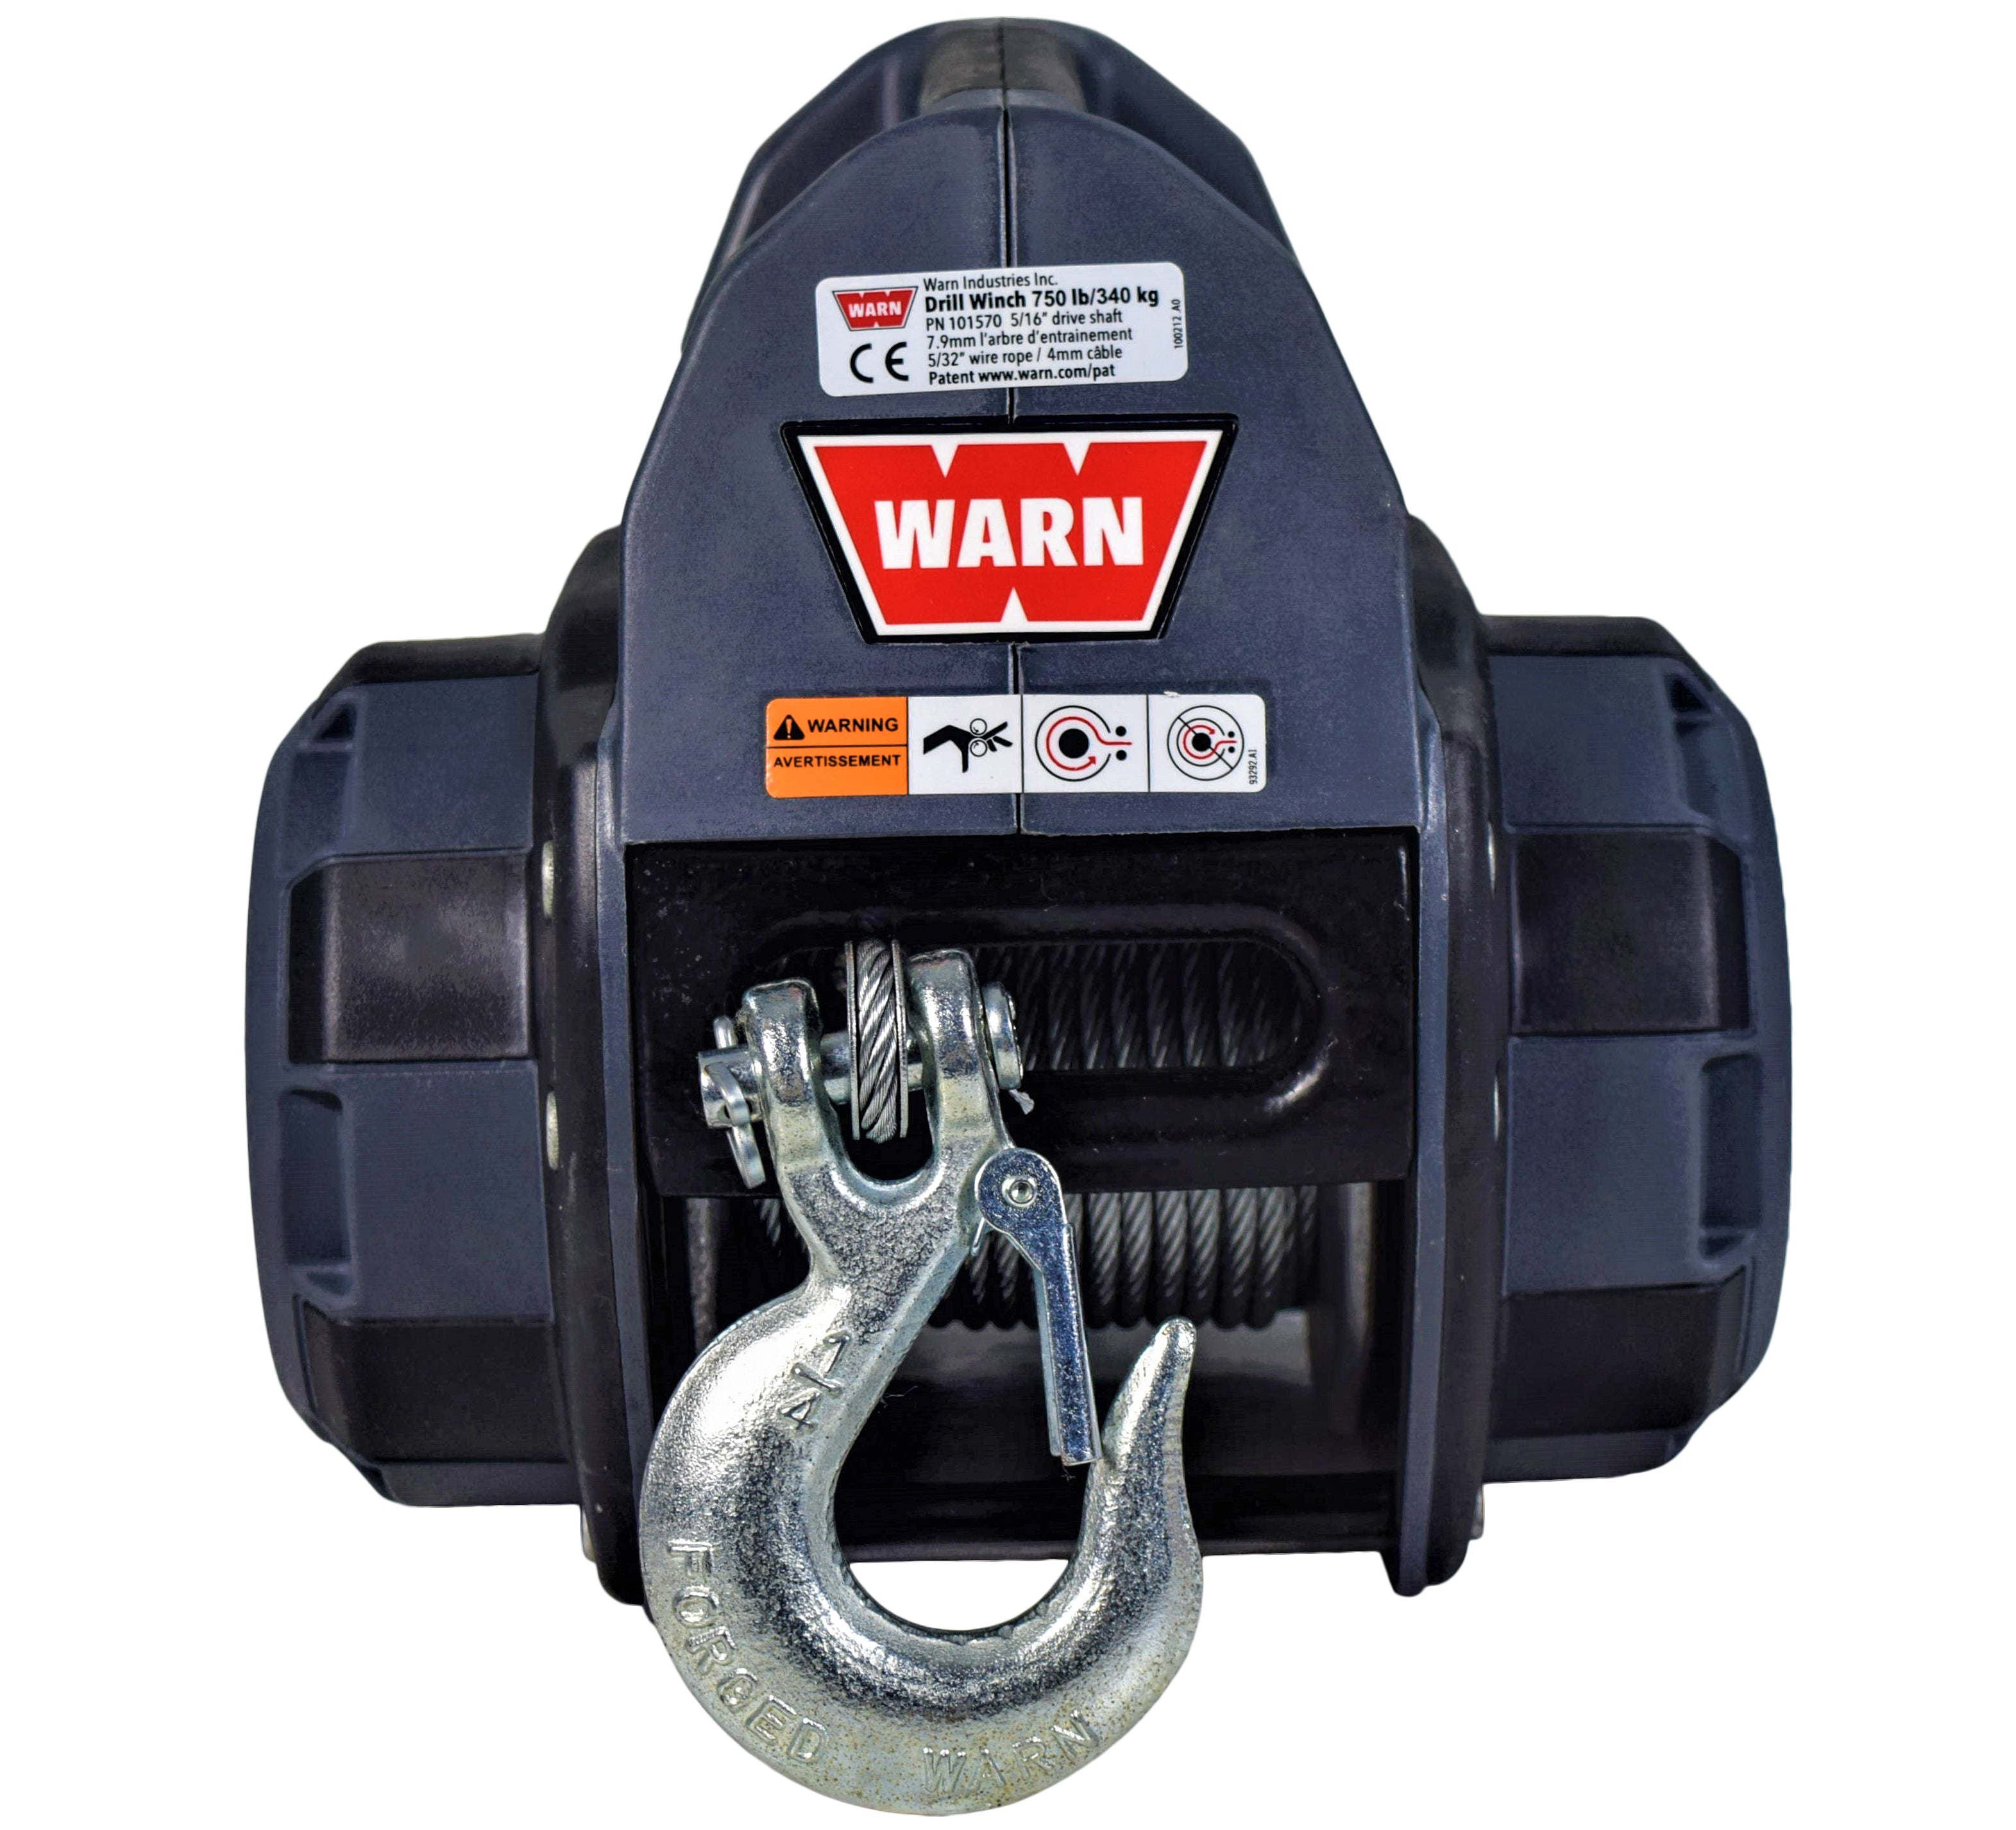 Loading a Car with the WARN Drill Winch 